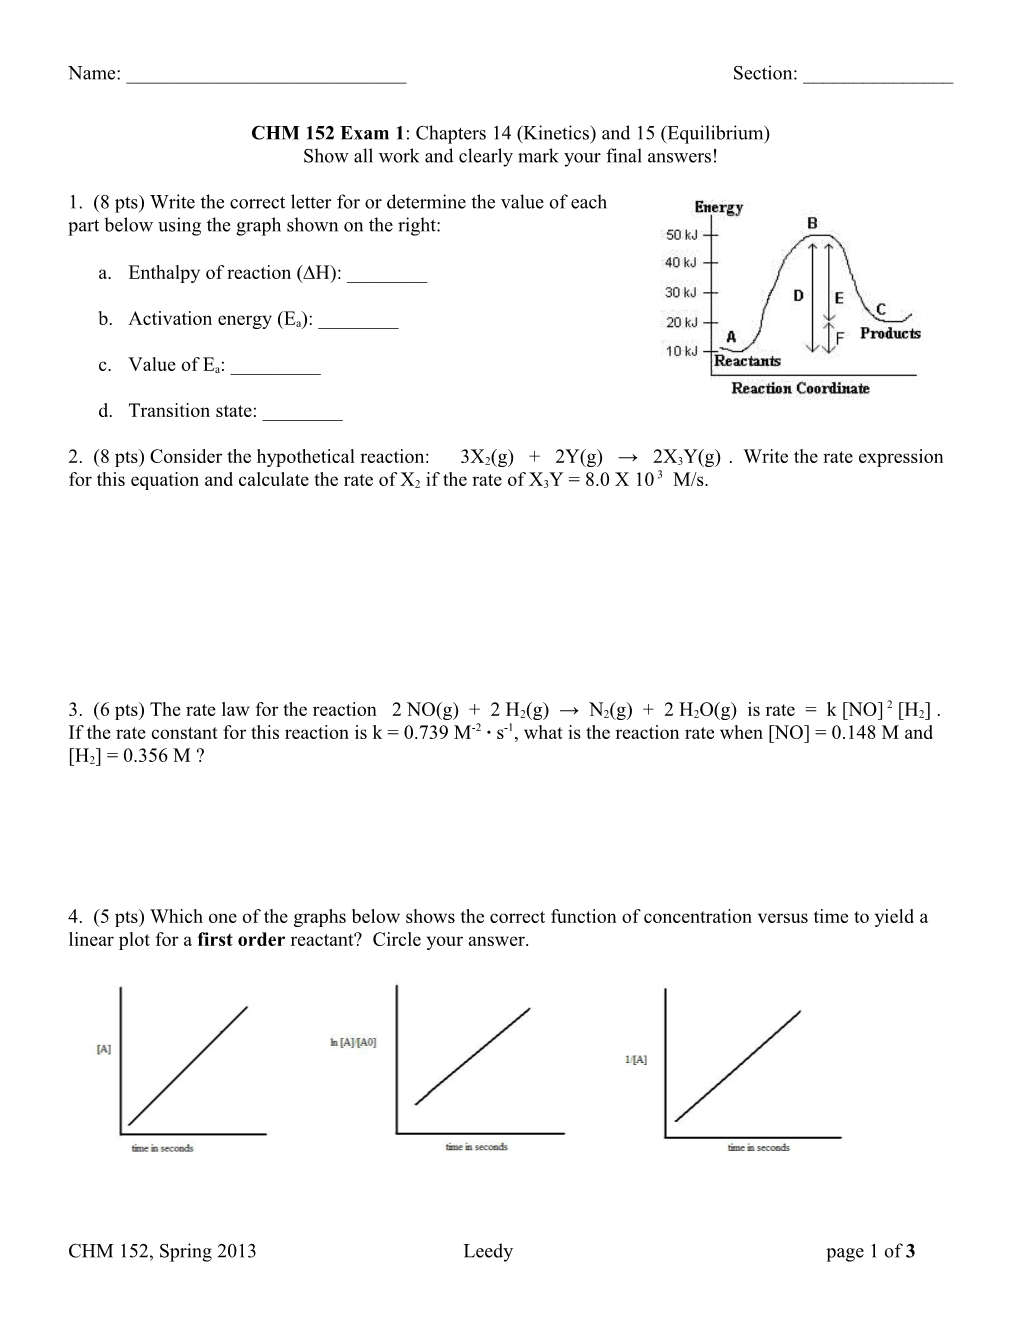 CHM 152 Exam 1: Chapters 14 (Kinetics) and 15 (Equilibrium)